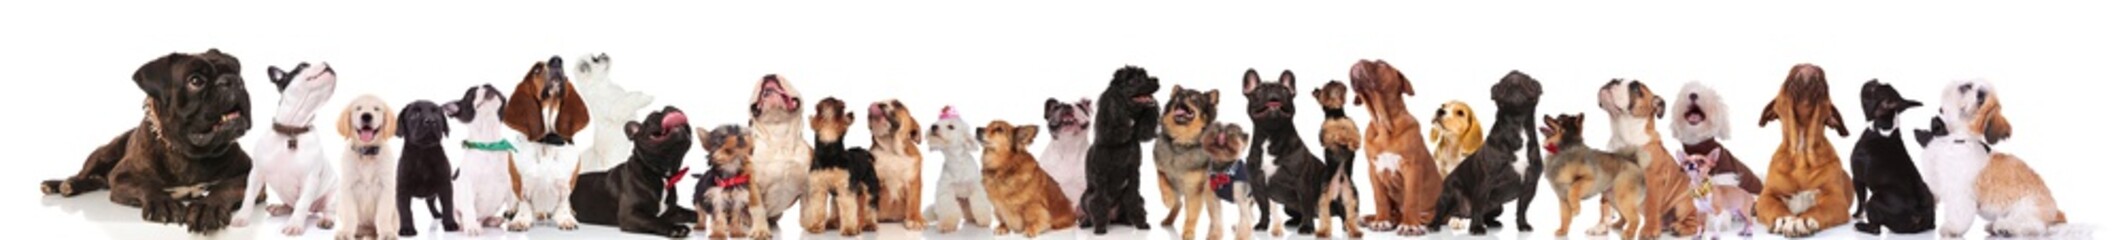 adorable large team of curious dogs on white background